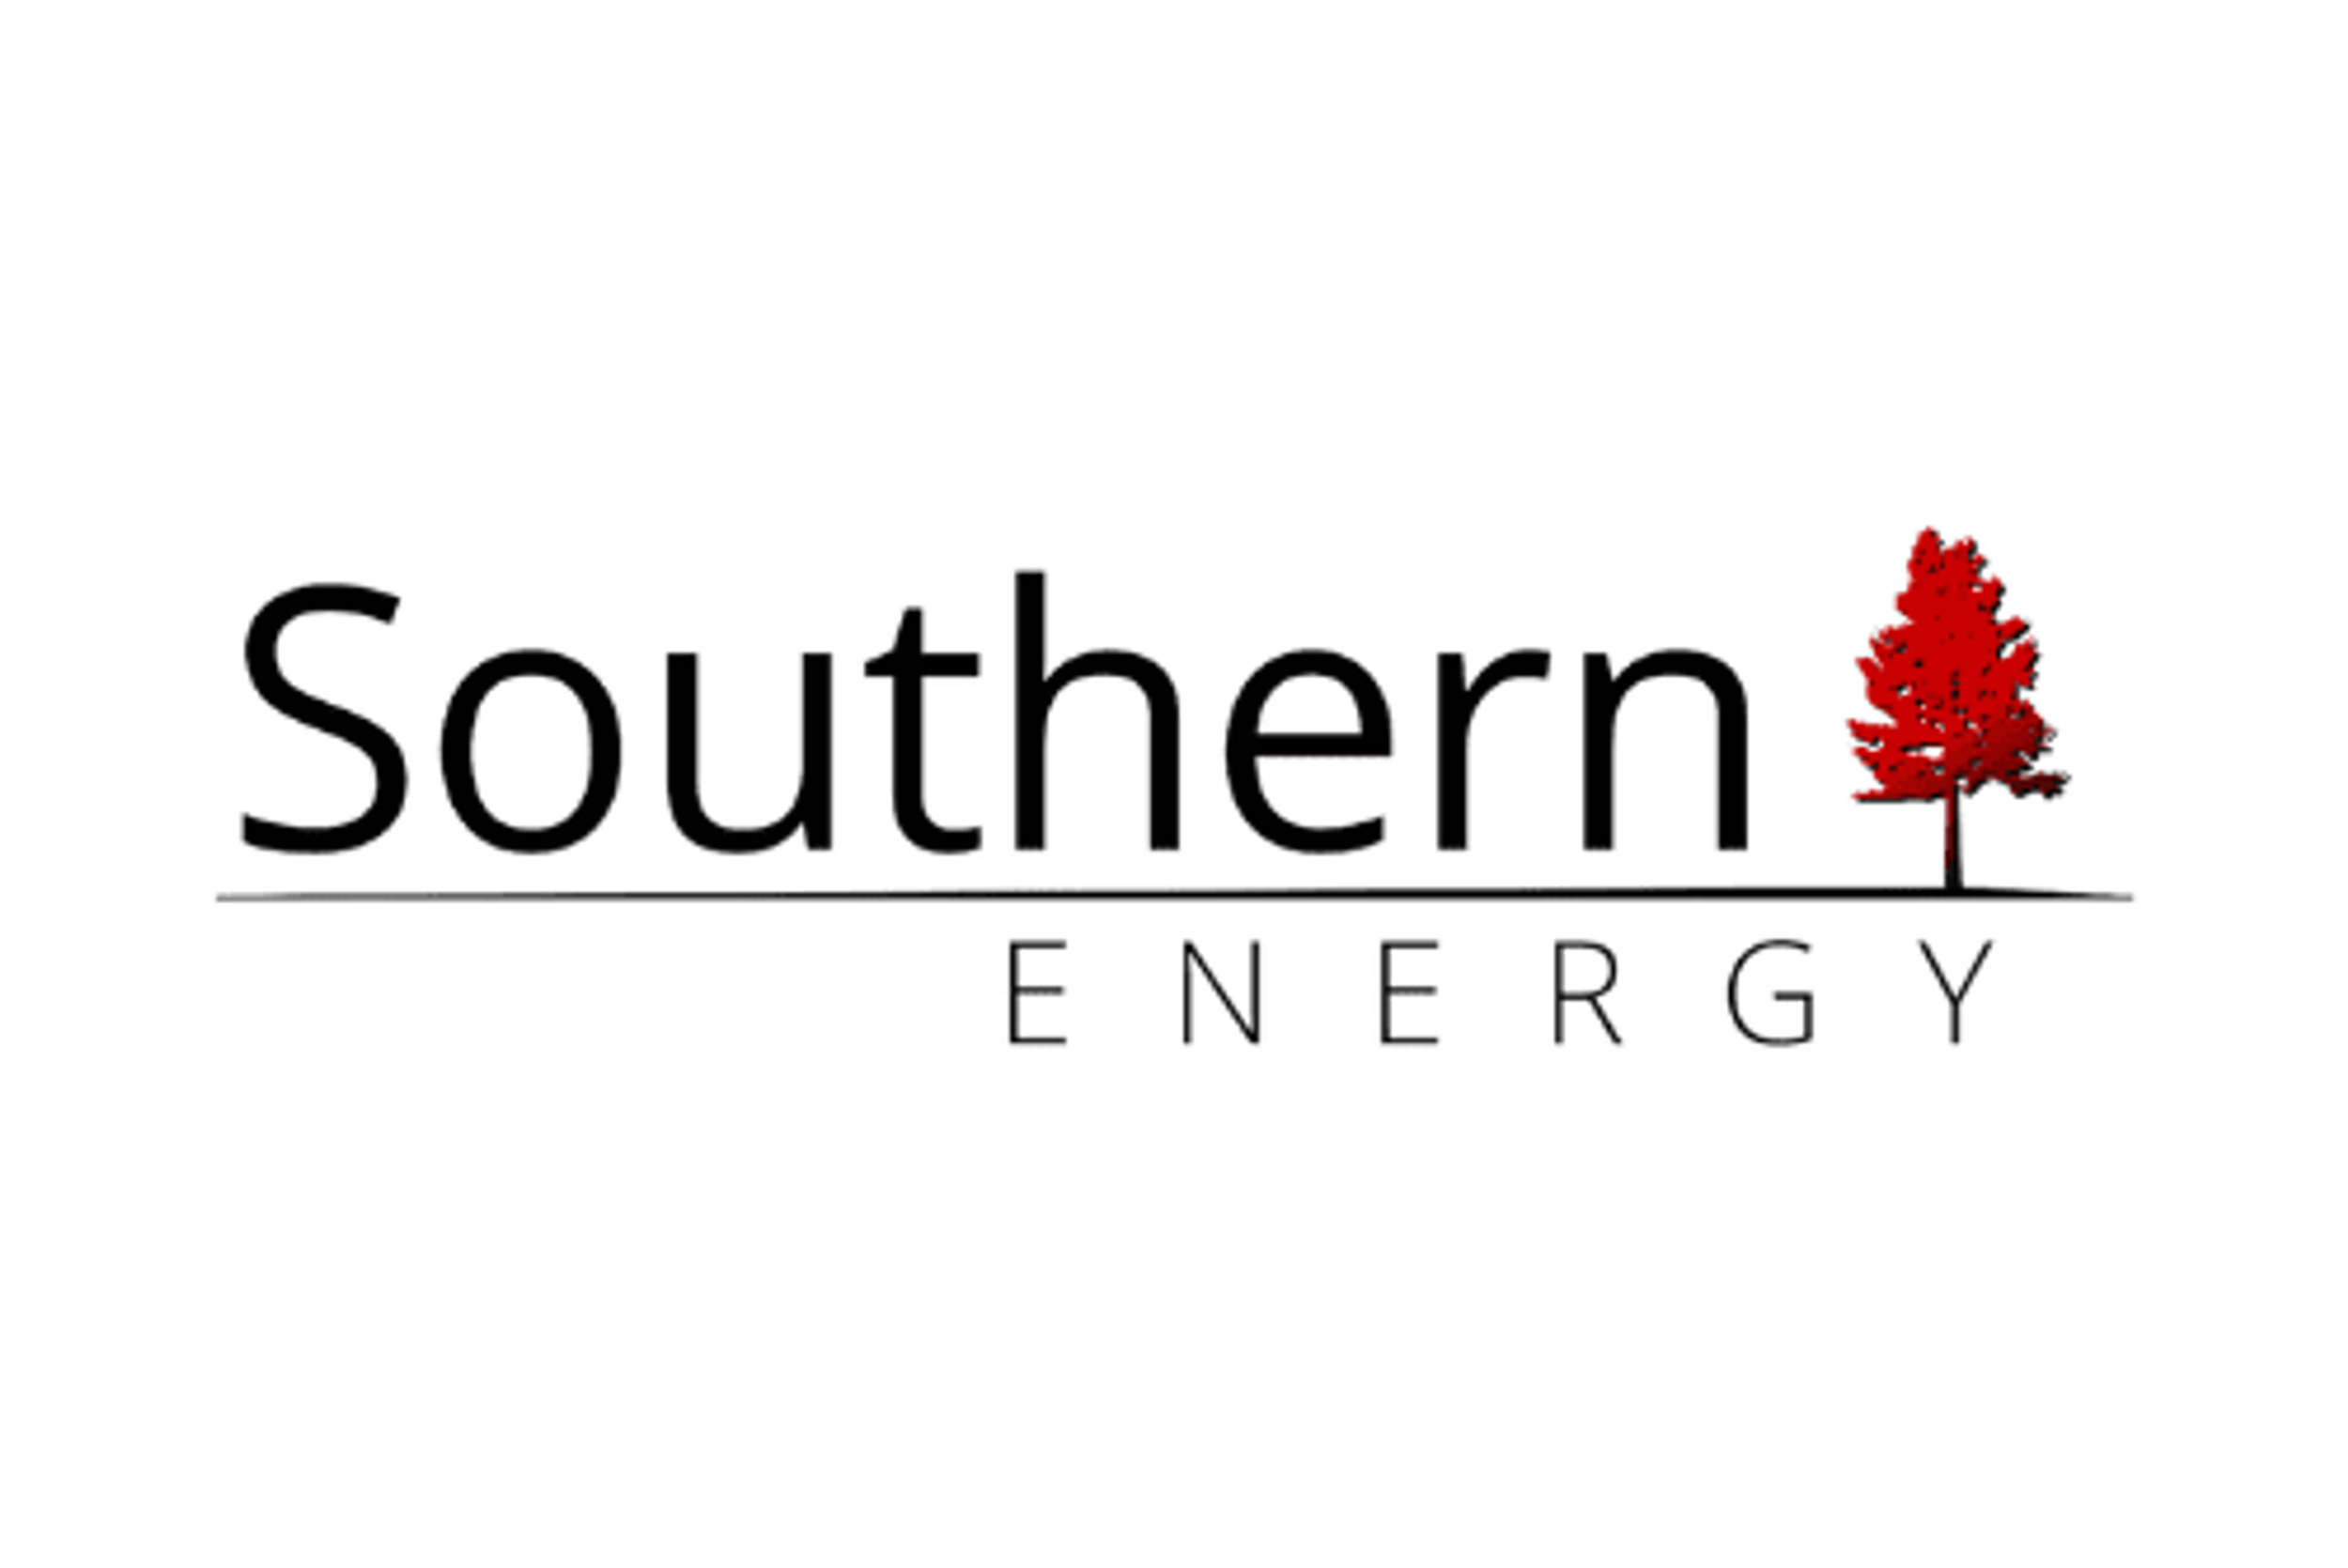 Southern Energy Corp. Announces Exercise of Warrants and Convertible Debenture Conversion